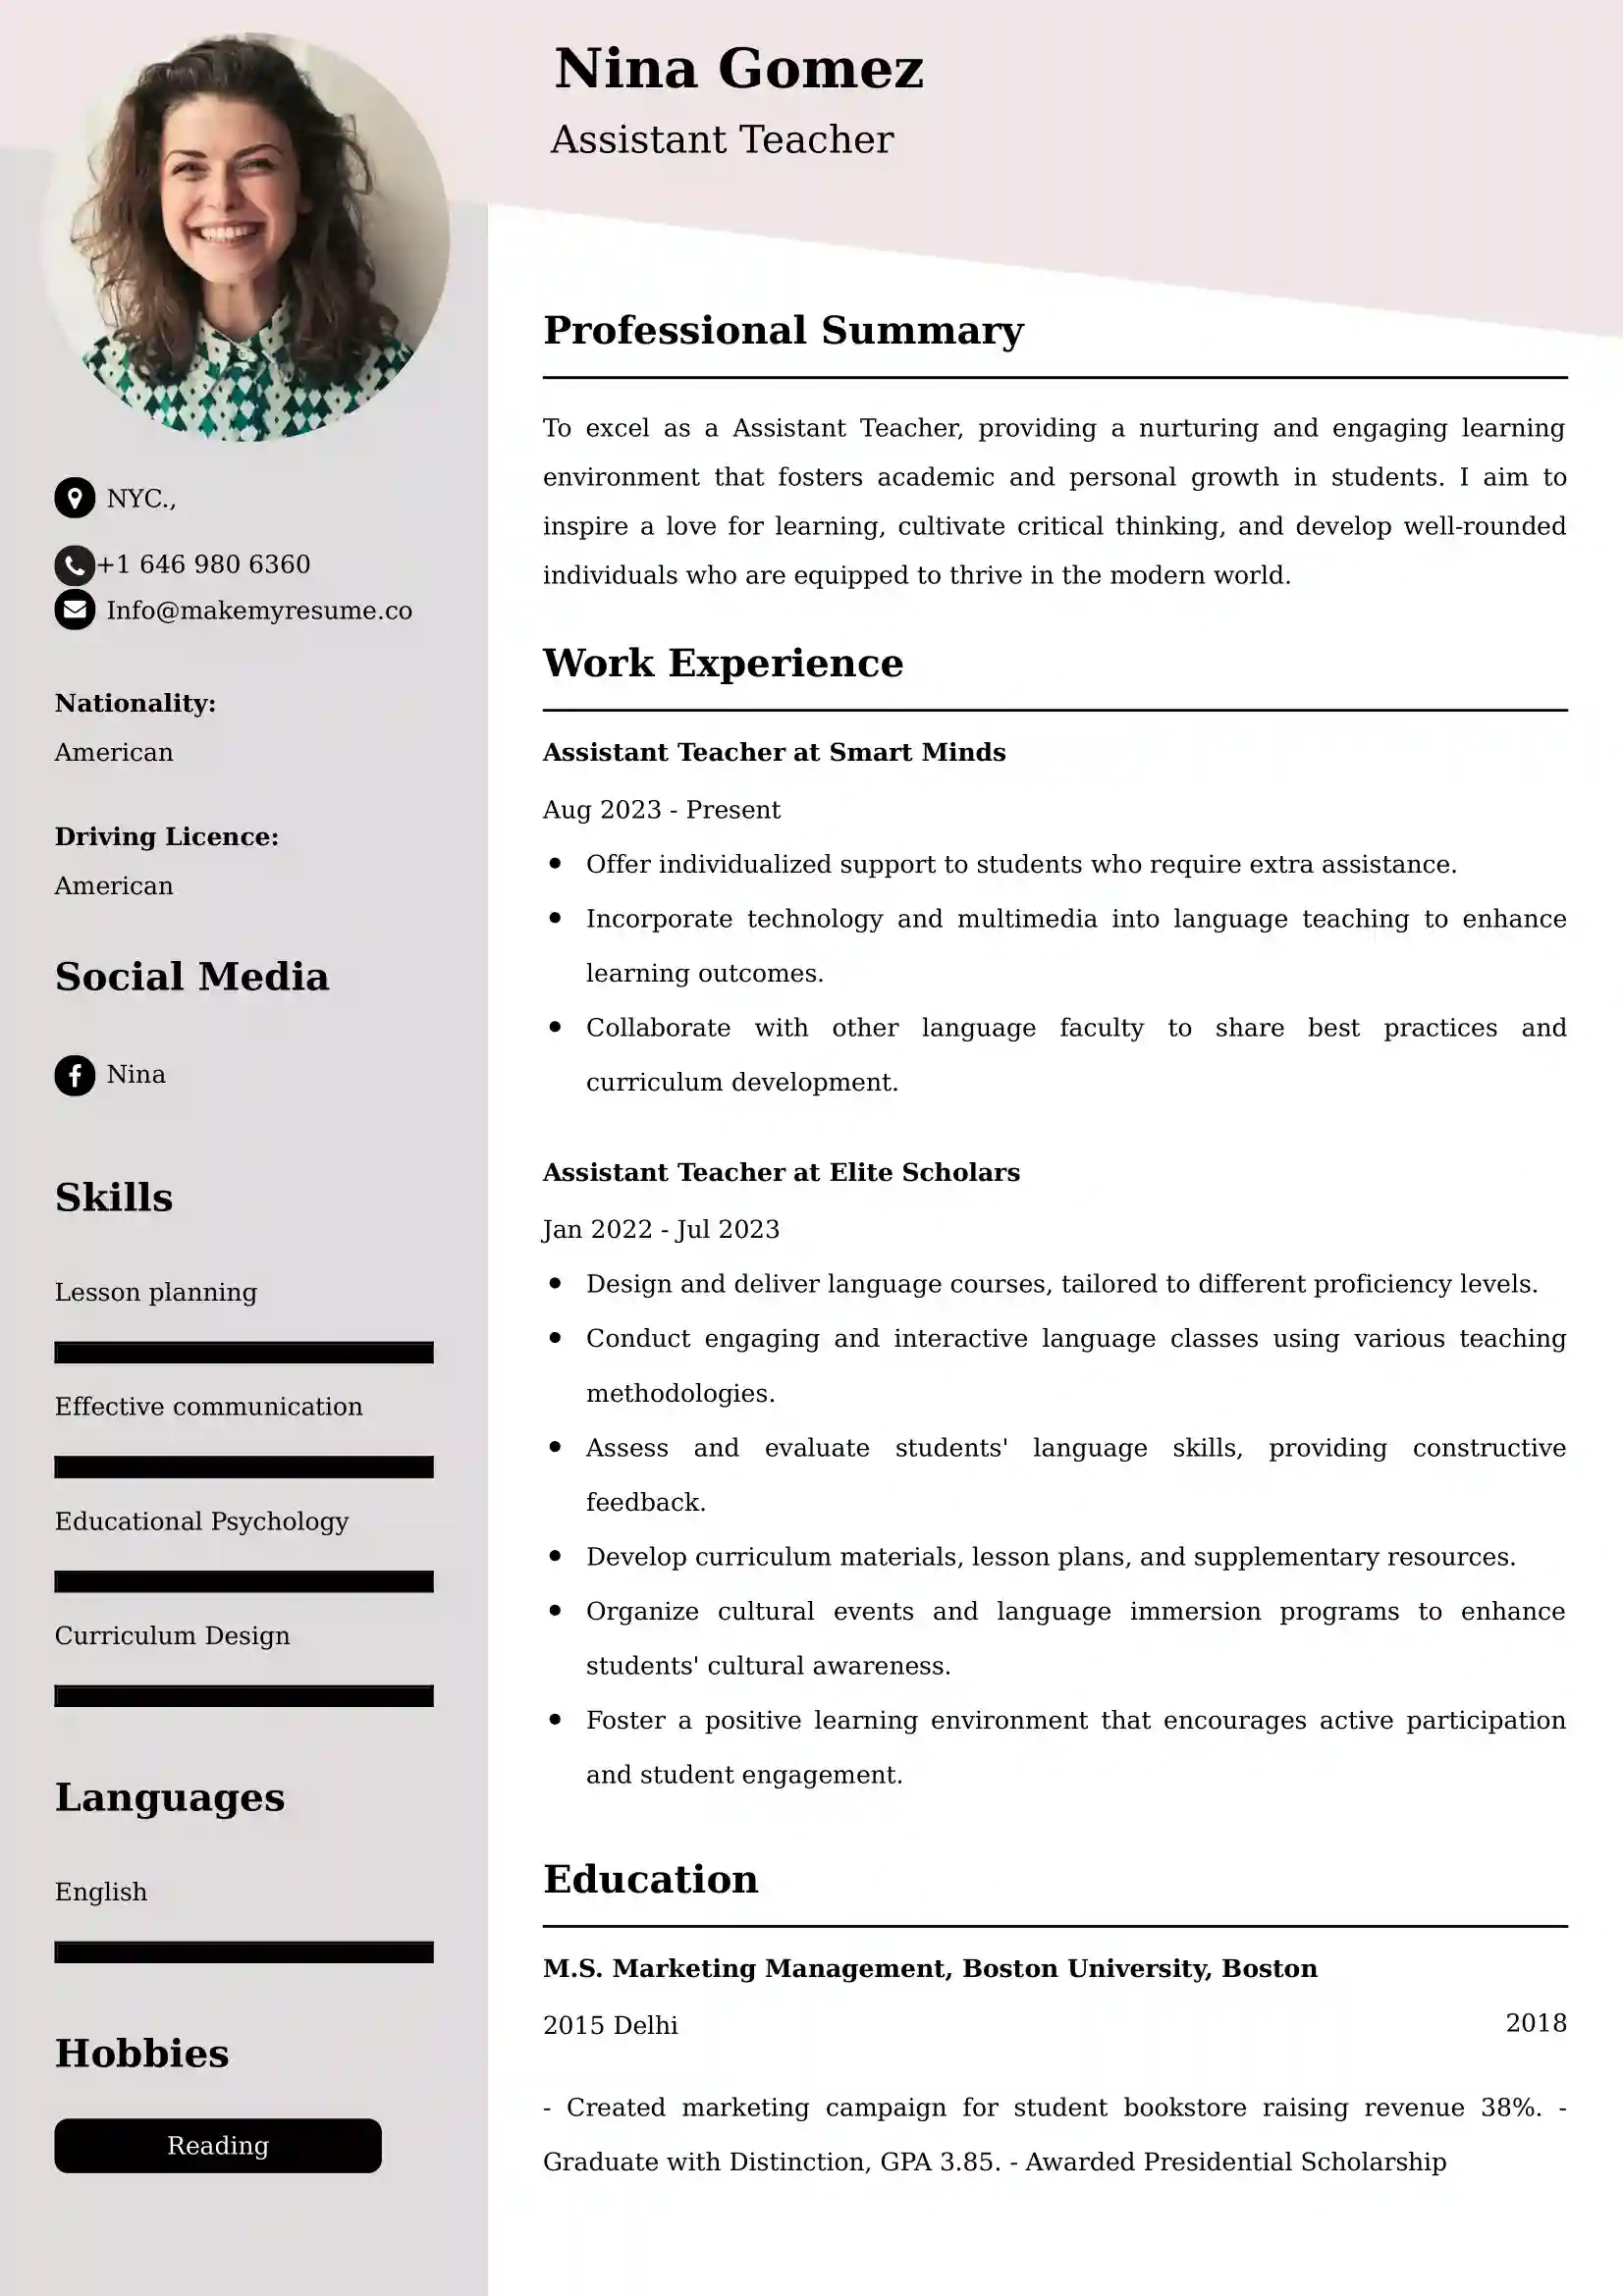 60+ Professional Teaching Resume Examples, Latest Format